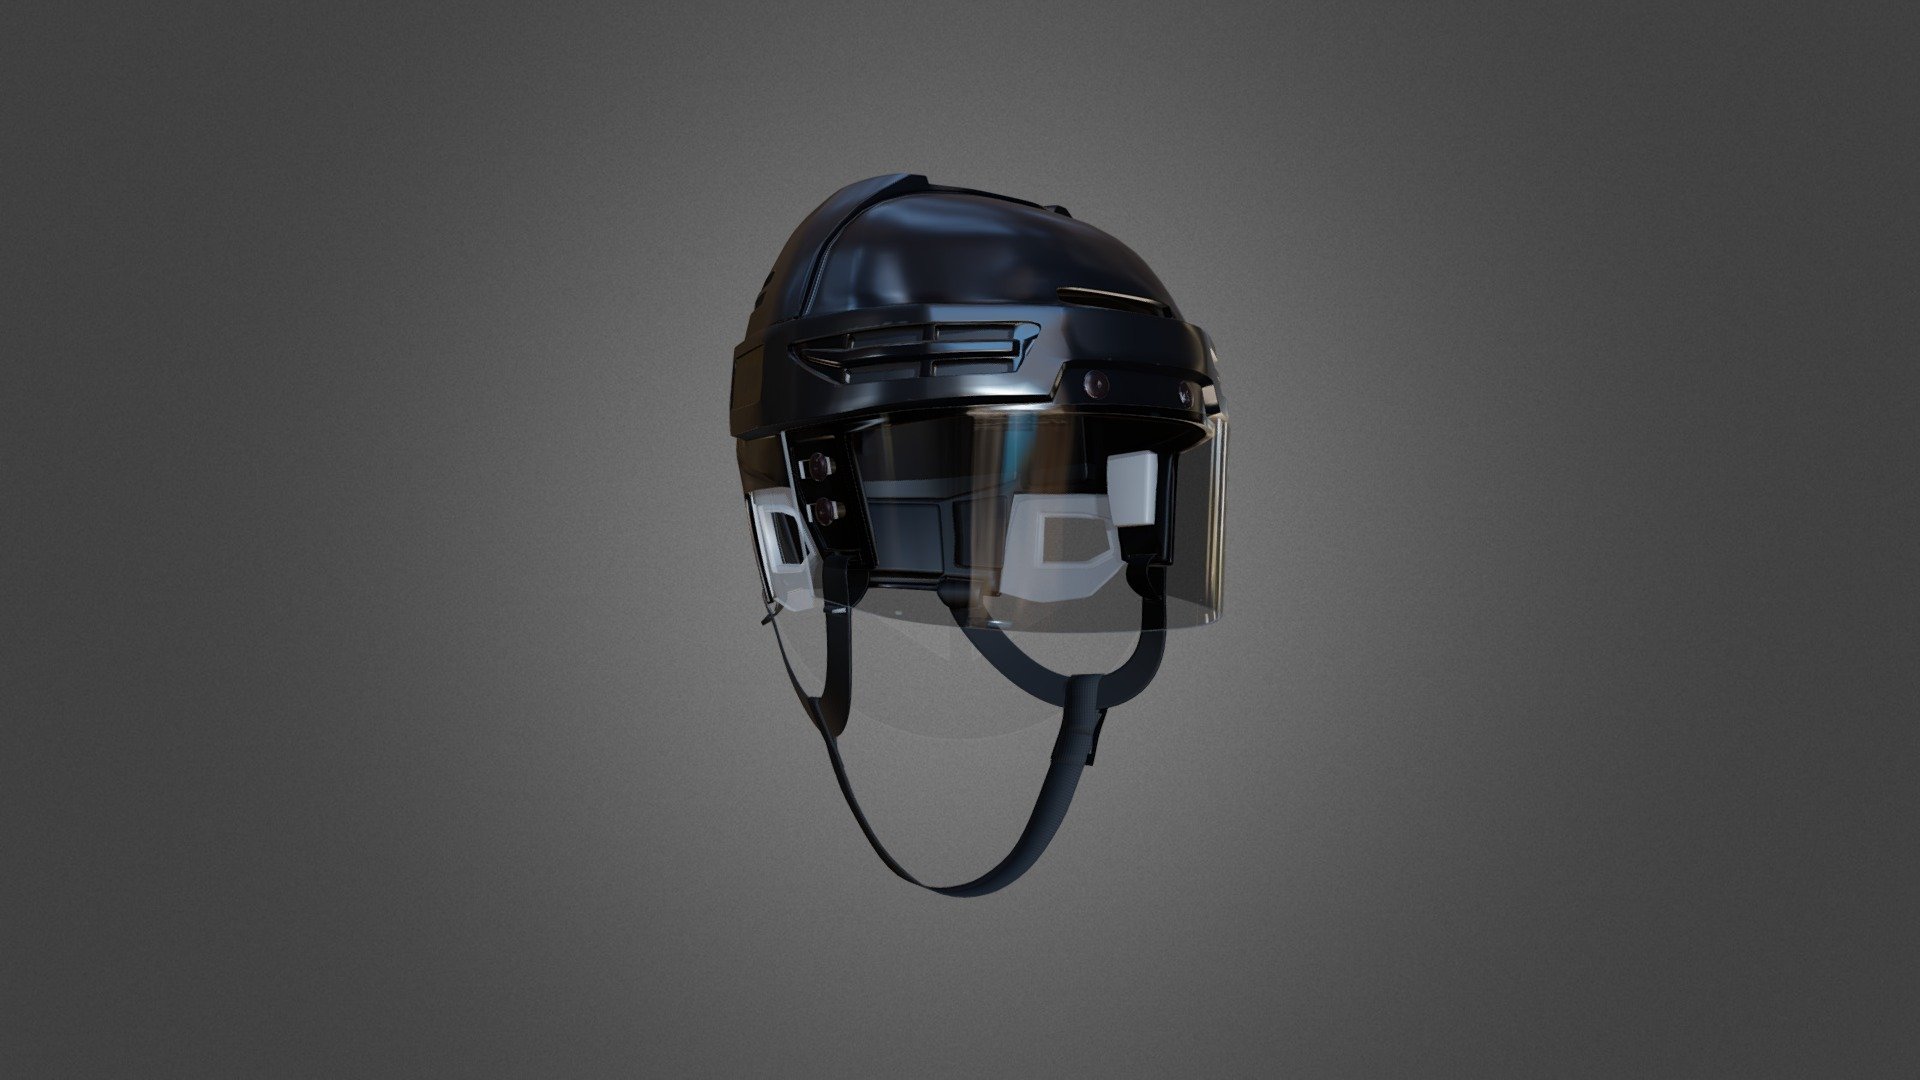 Classic Ice Hockey Helmet with Glass Visor 3D model

3D Model of Ice Hockey Helmet with Glass Visor. Original Premium Design.

This model was created in software &lsquo;Blender 3D' with GNU General Public License (GPL, or free software)

To work in other software, you can take advantage of additional models .3ds, .fbx and .obj formats.

Zip contains:

1 .blend with UV and Materials

1 .max 2016

1 .mat(Vray Materials)

1 .fbx

1 .obj

And high resolution textures(4096x4096): Base Color, Ambient Occlusion, Height map, Normal map, Metallic, Roughness

The author hopes to your creativity.

If you have questions or suggestions, please contact me - Classic Ice Hockey Helmet with Glass Visor - 3D model by Vitamin (@btrseller) 3d model